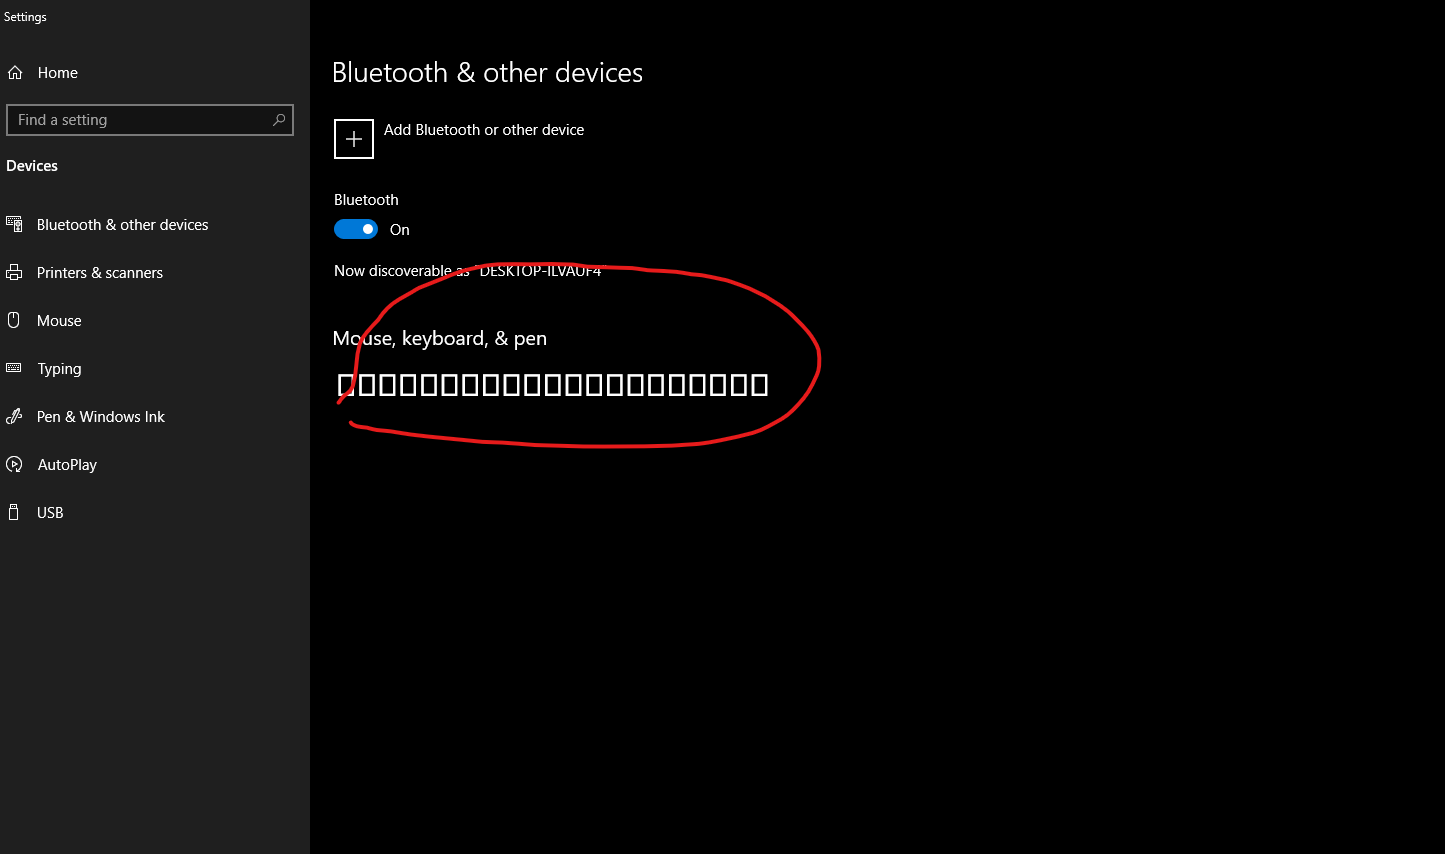 Weird font issue on bluetooth settings page, how to fix? cfe13055-6f5b-4a06-90ac-bf2080628966?upload=true.png